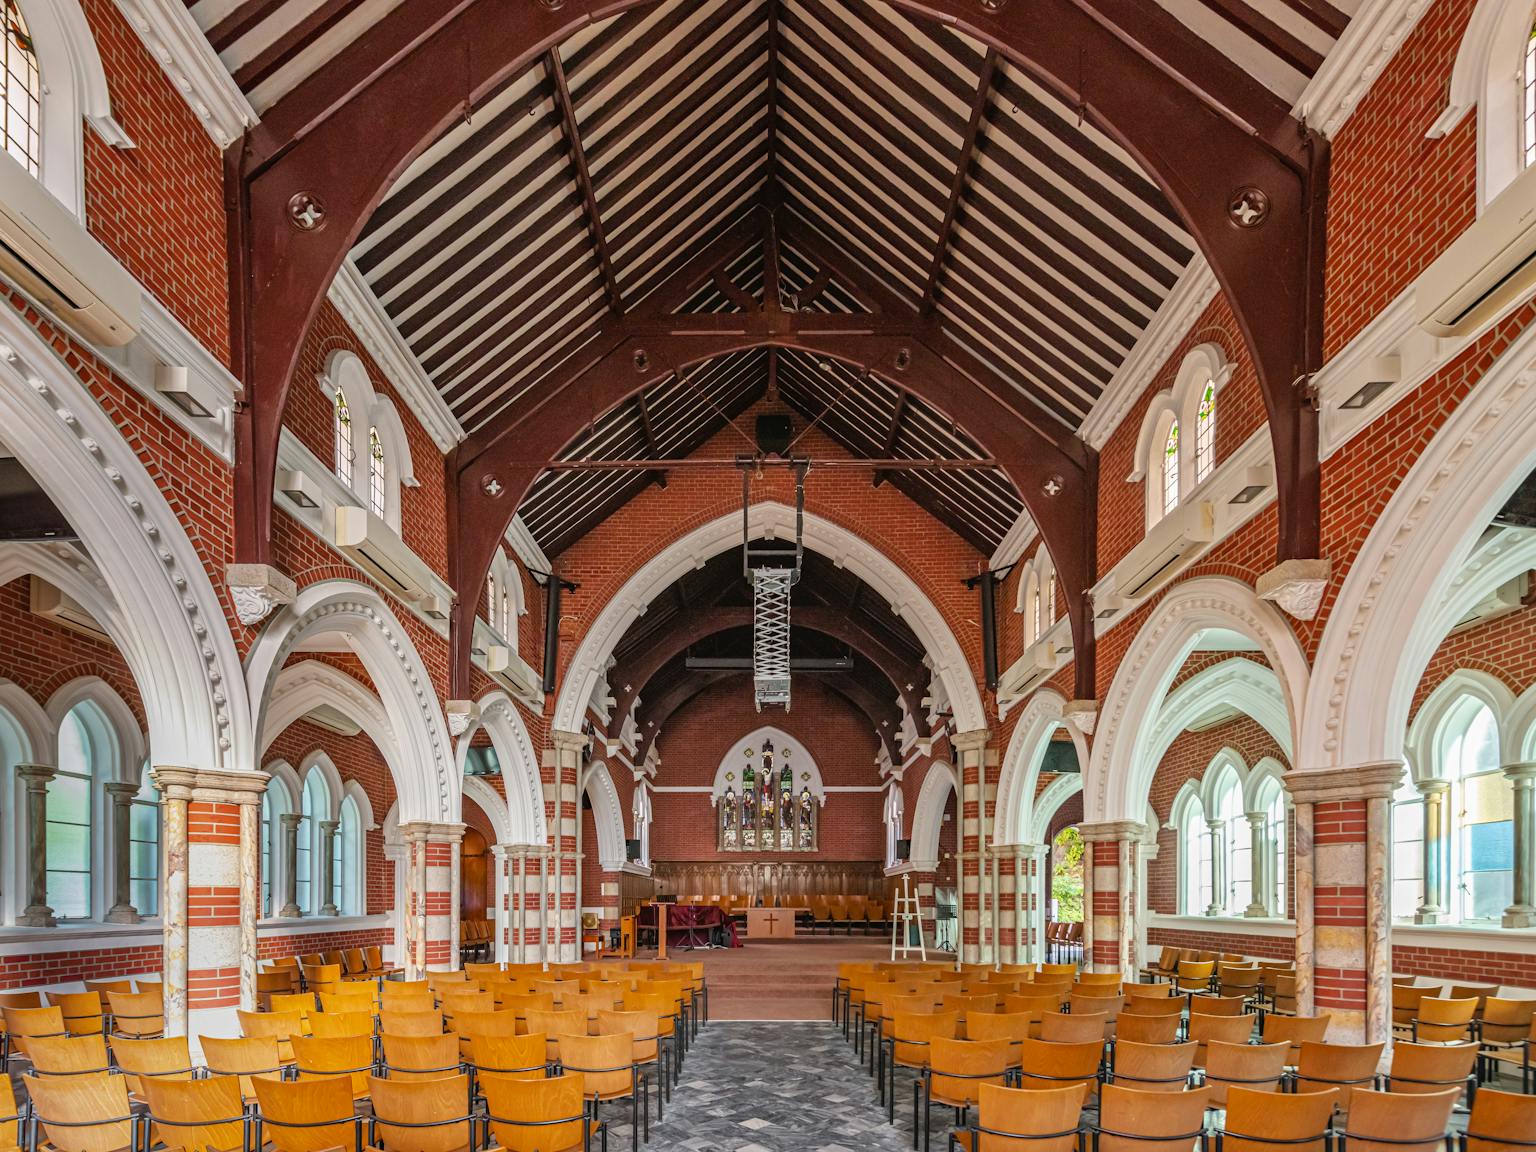 Interior of St Andrew's Church, Kowloon, Hong Kong. Purcell provided funding assistance and a condition survey for the client.